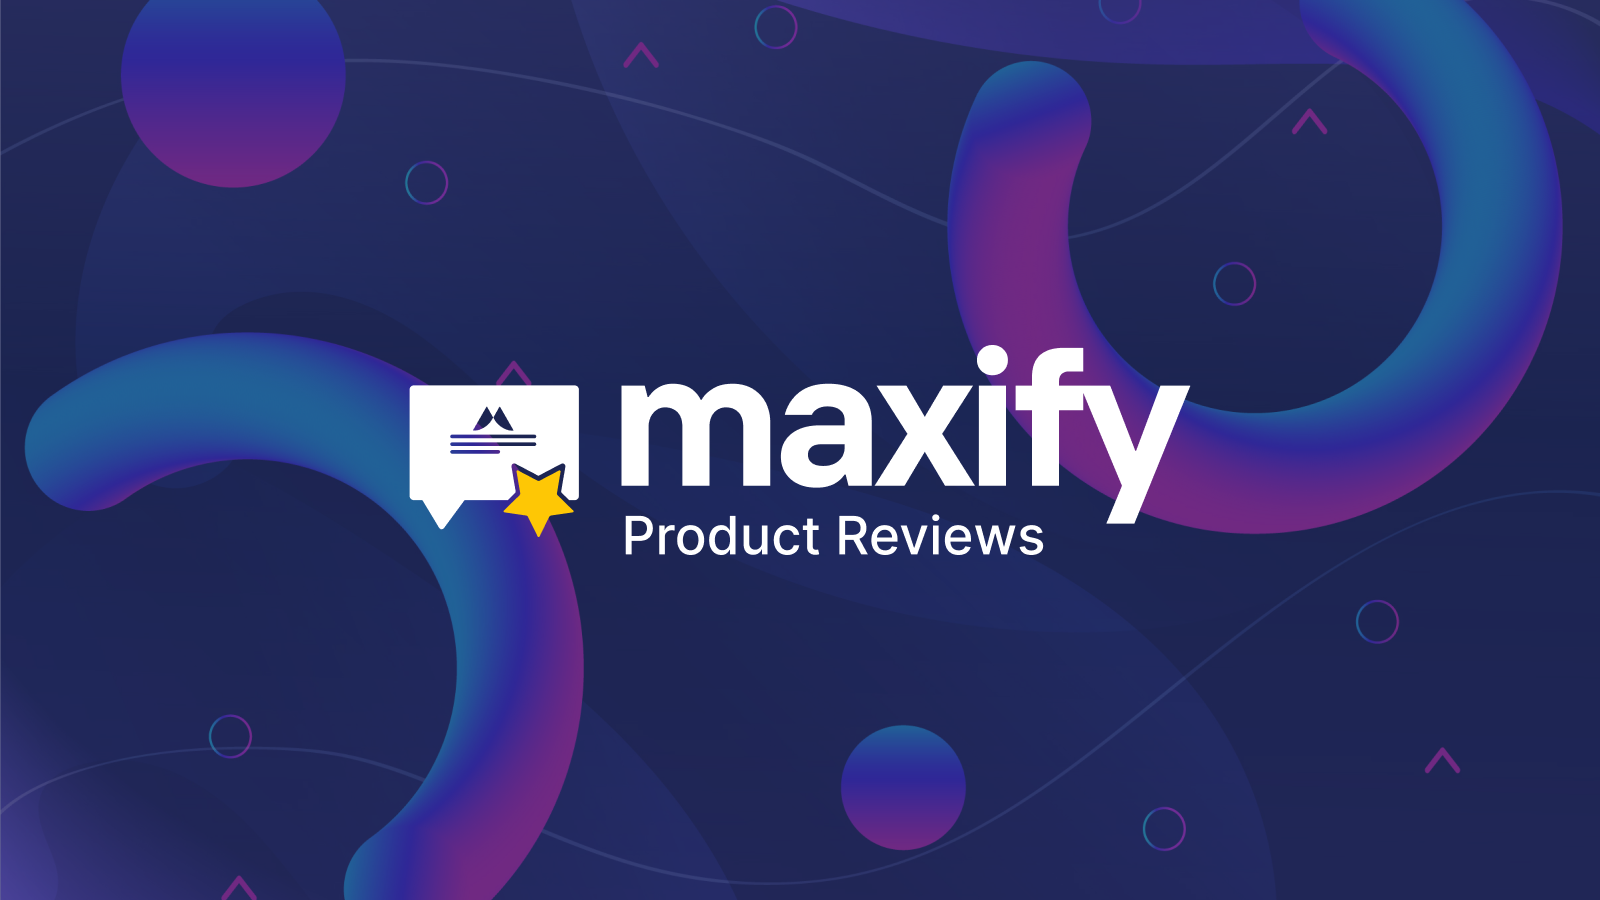 Maxify Product Reviews特色图片